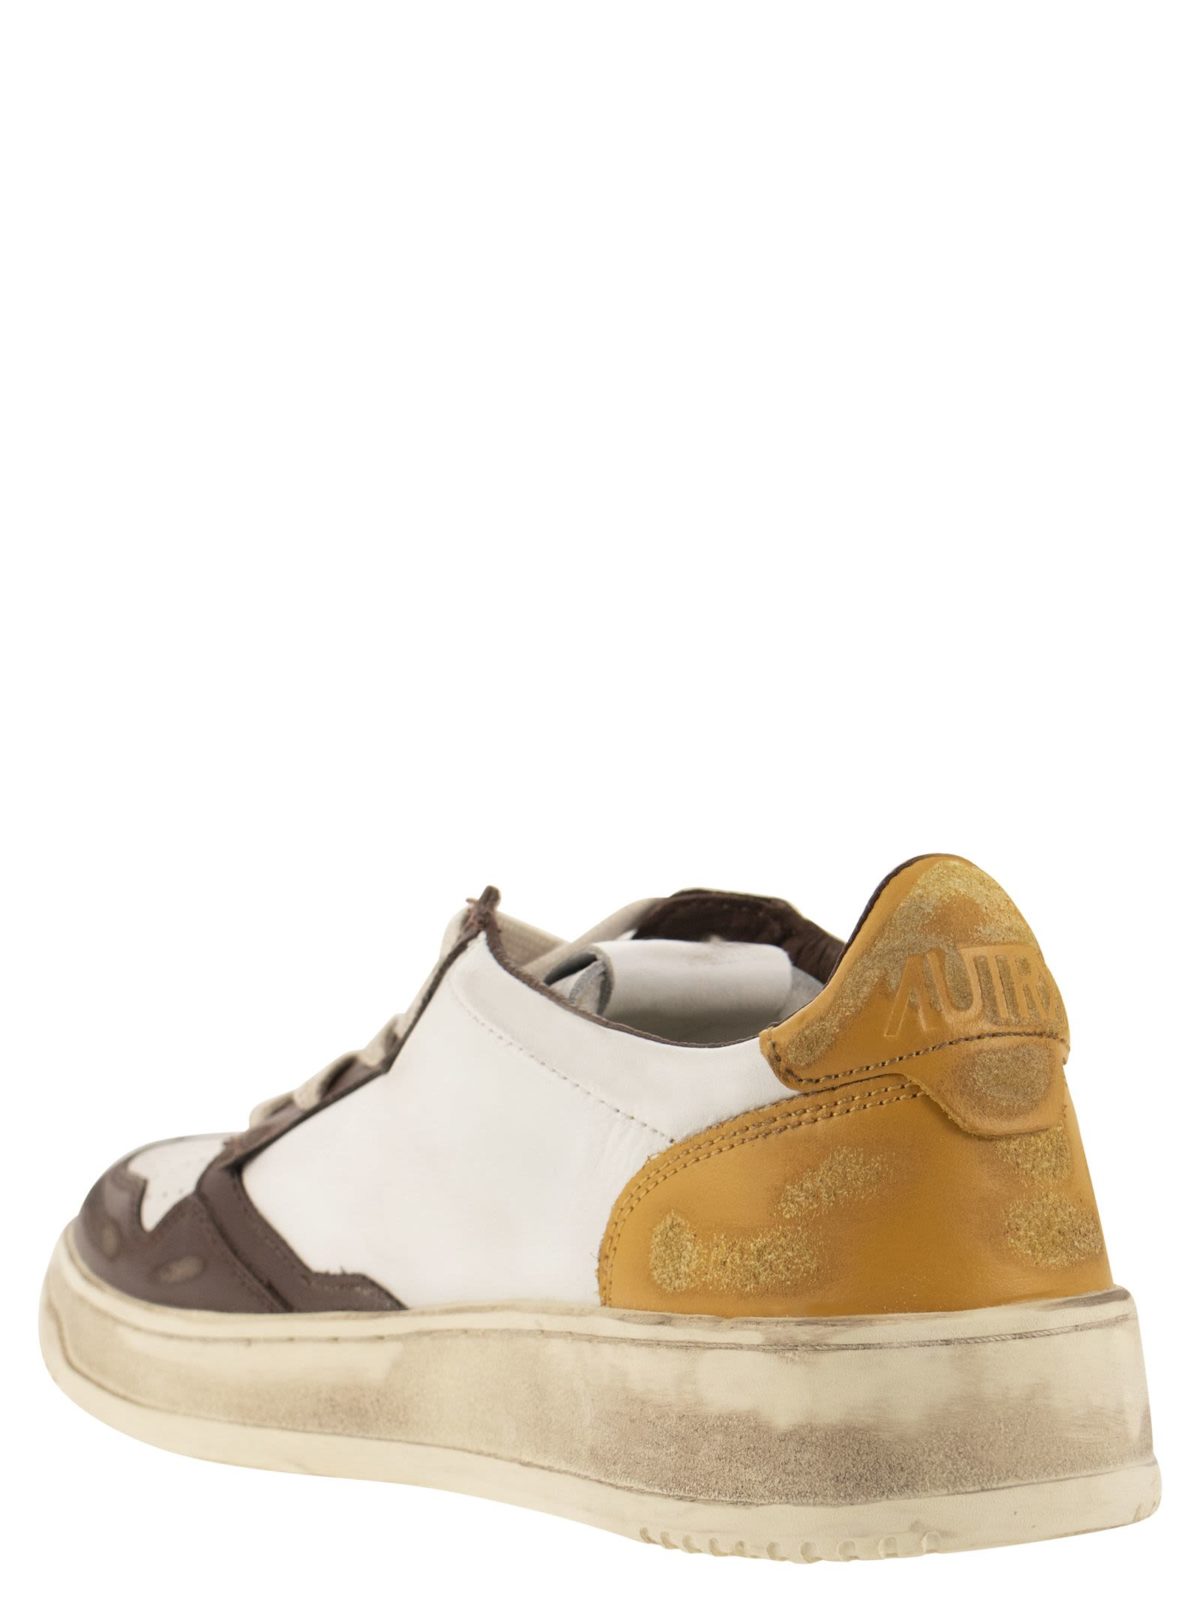 SNEAKERS LOW LEAT/LEAT WHITE/BROWN/HONEY - Bellettini.com